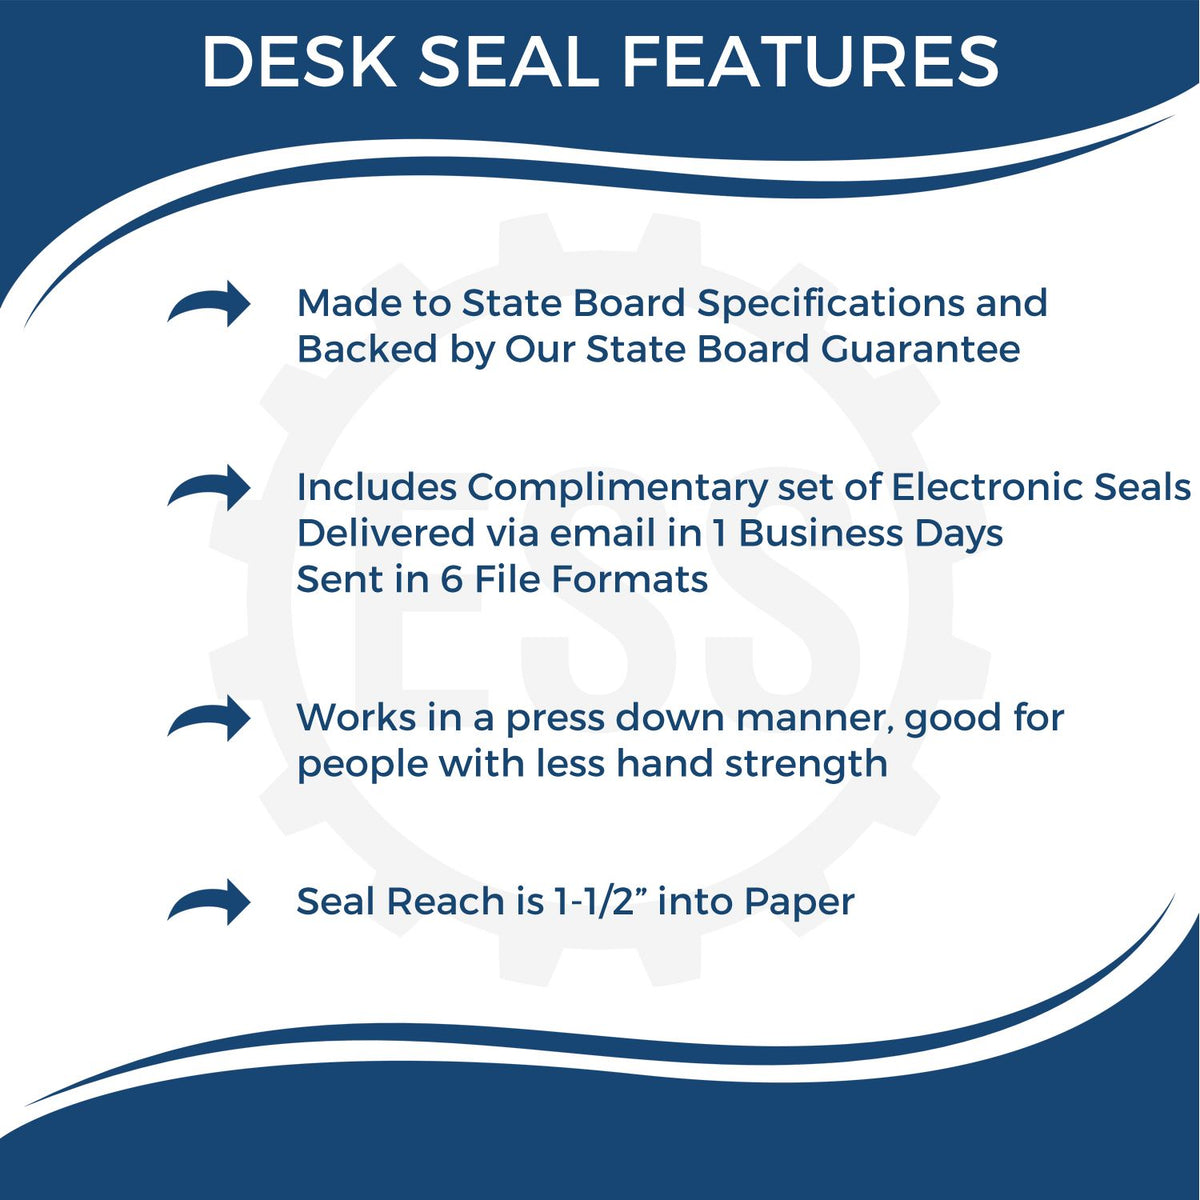 A picture of an infographic highlighting the selling points for the Montana Geologist Desk Seal